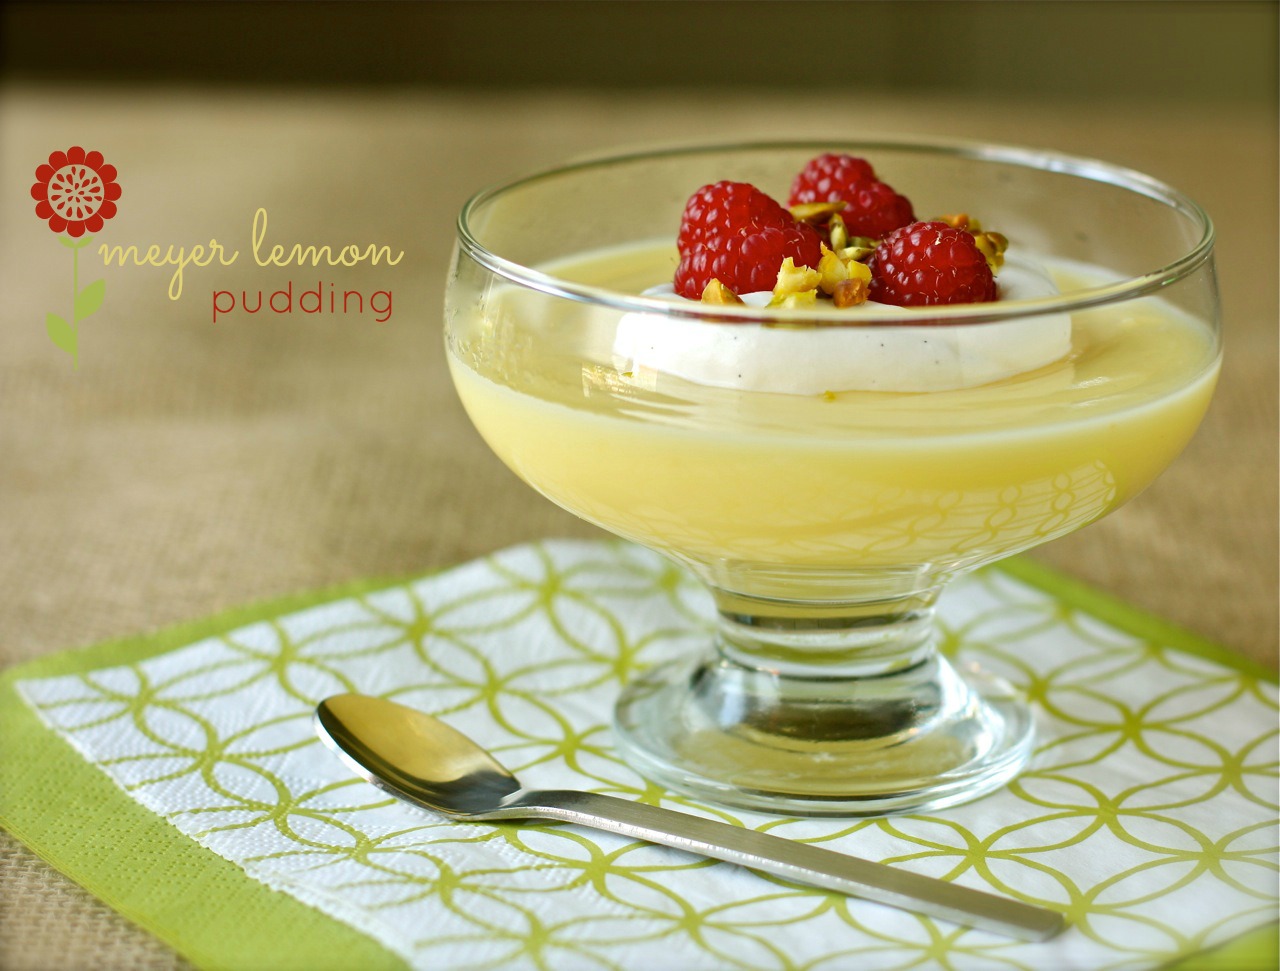 meyer lemon pudding with chantilly cream, raspberries, and pistachios | daisy's world